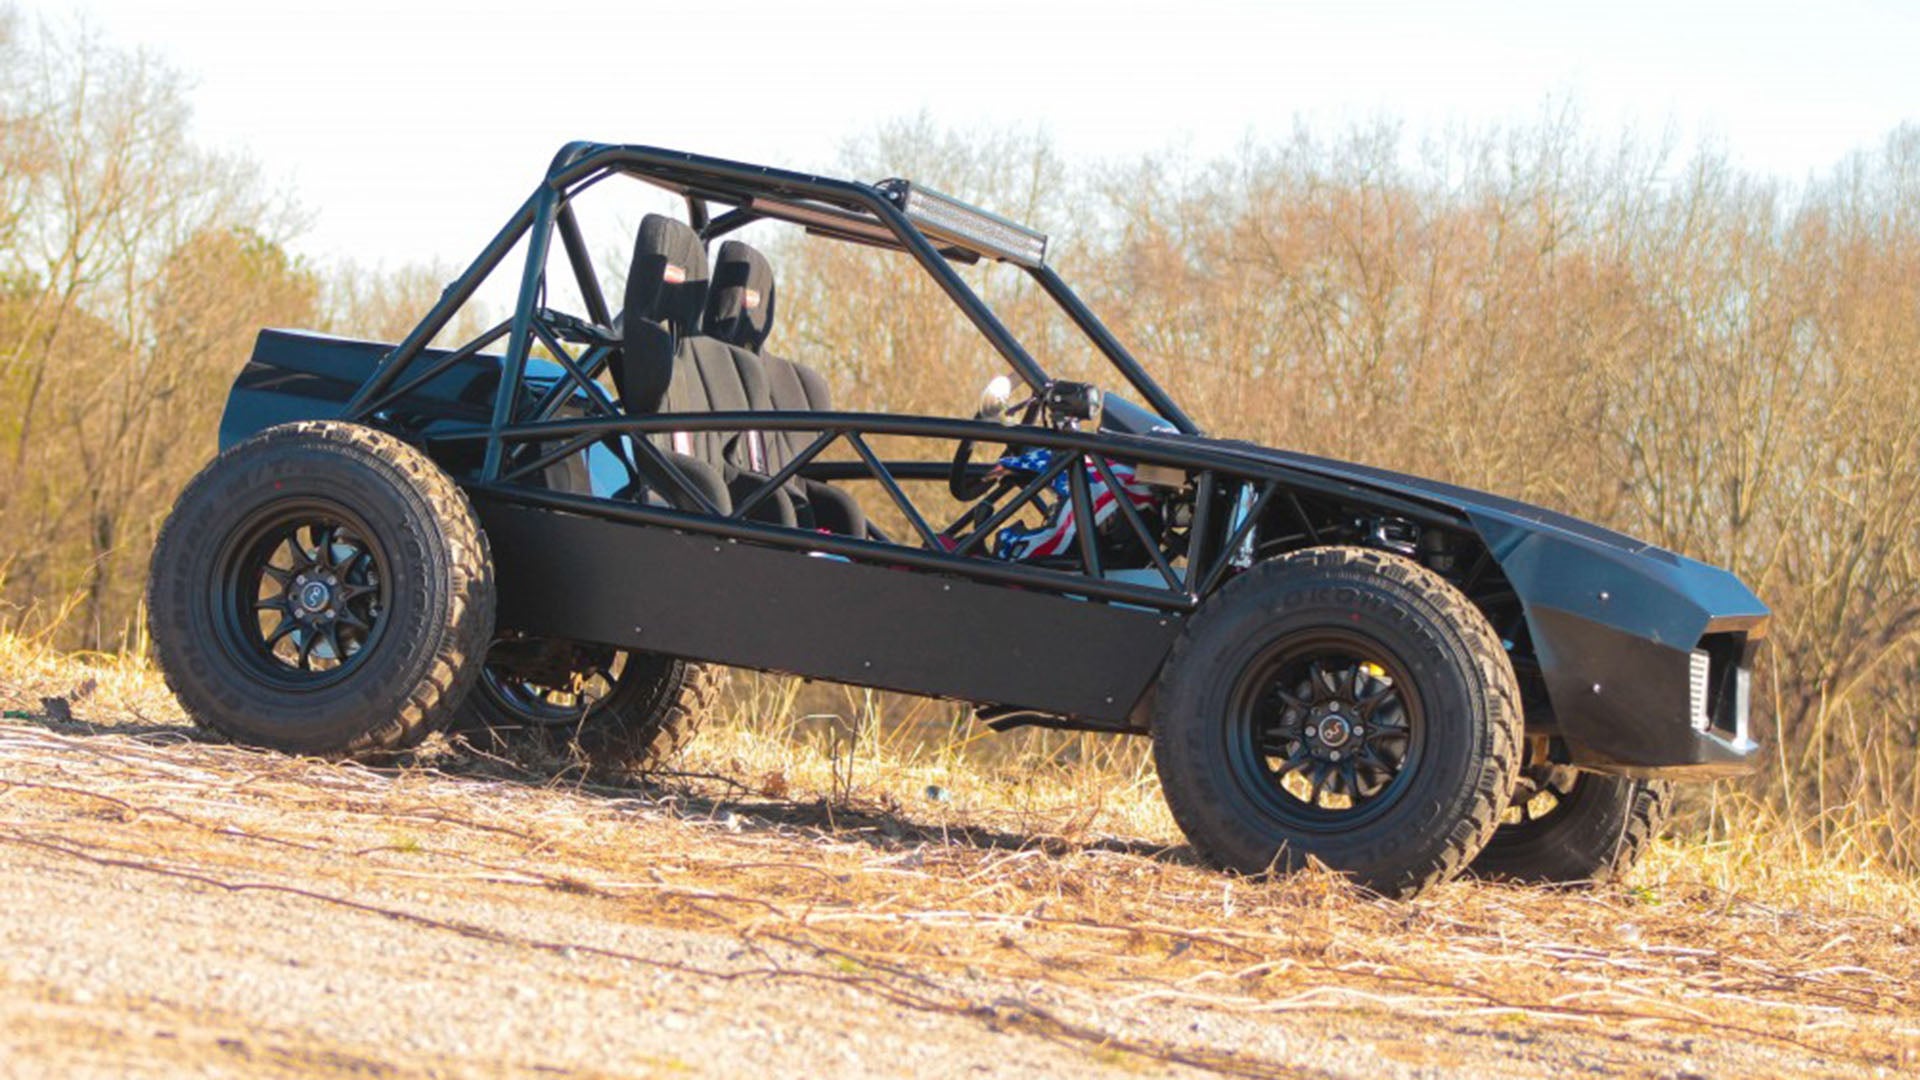 The Exocet Off-Road Is a Lifted, Post-Apocalyptic Mazda Miata